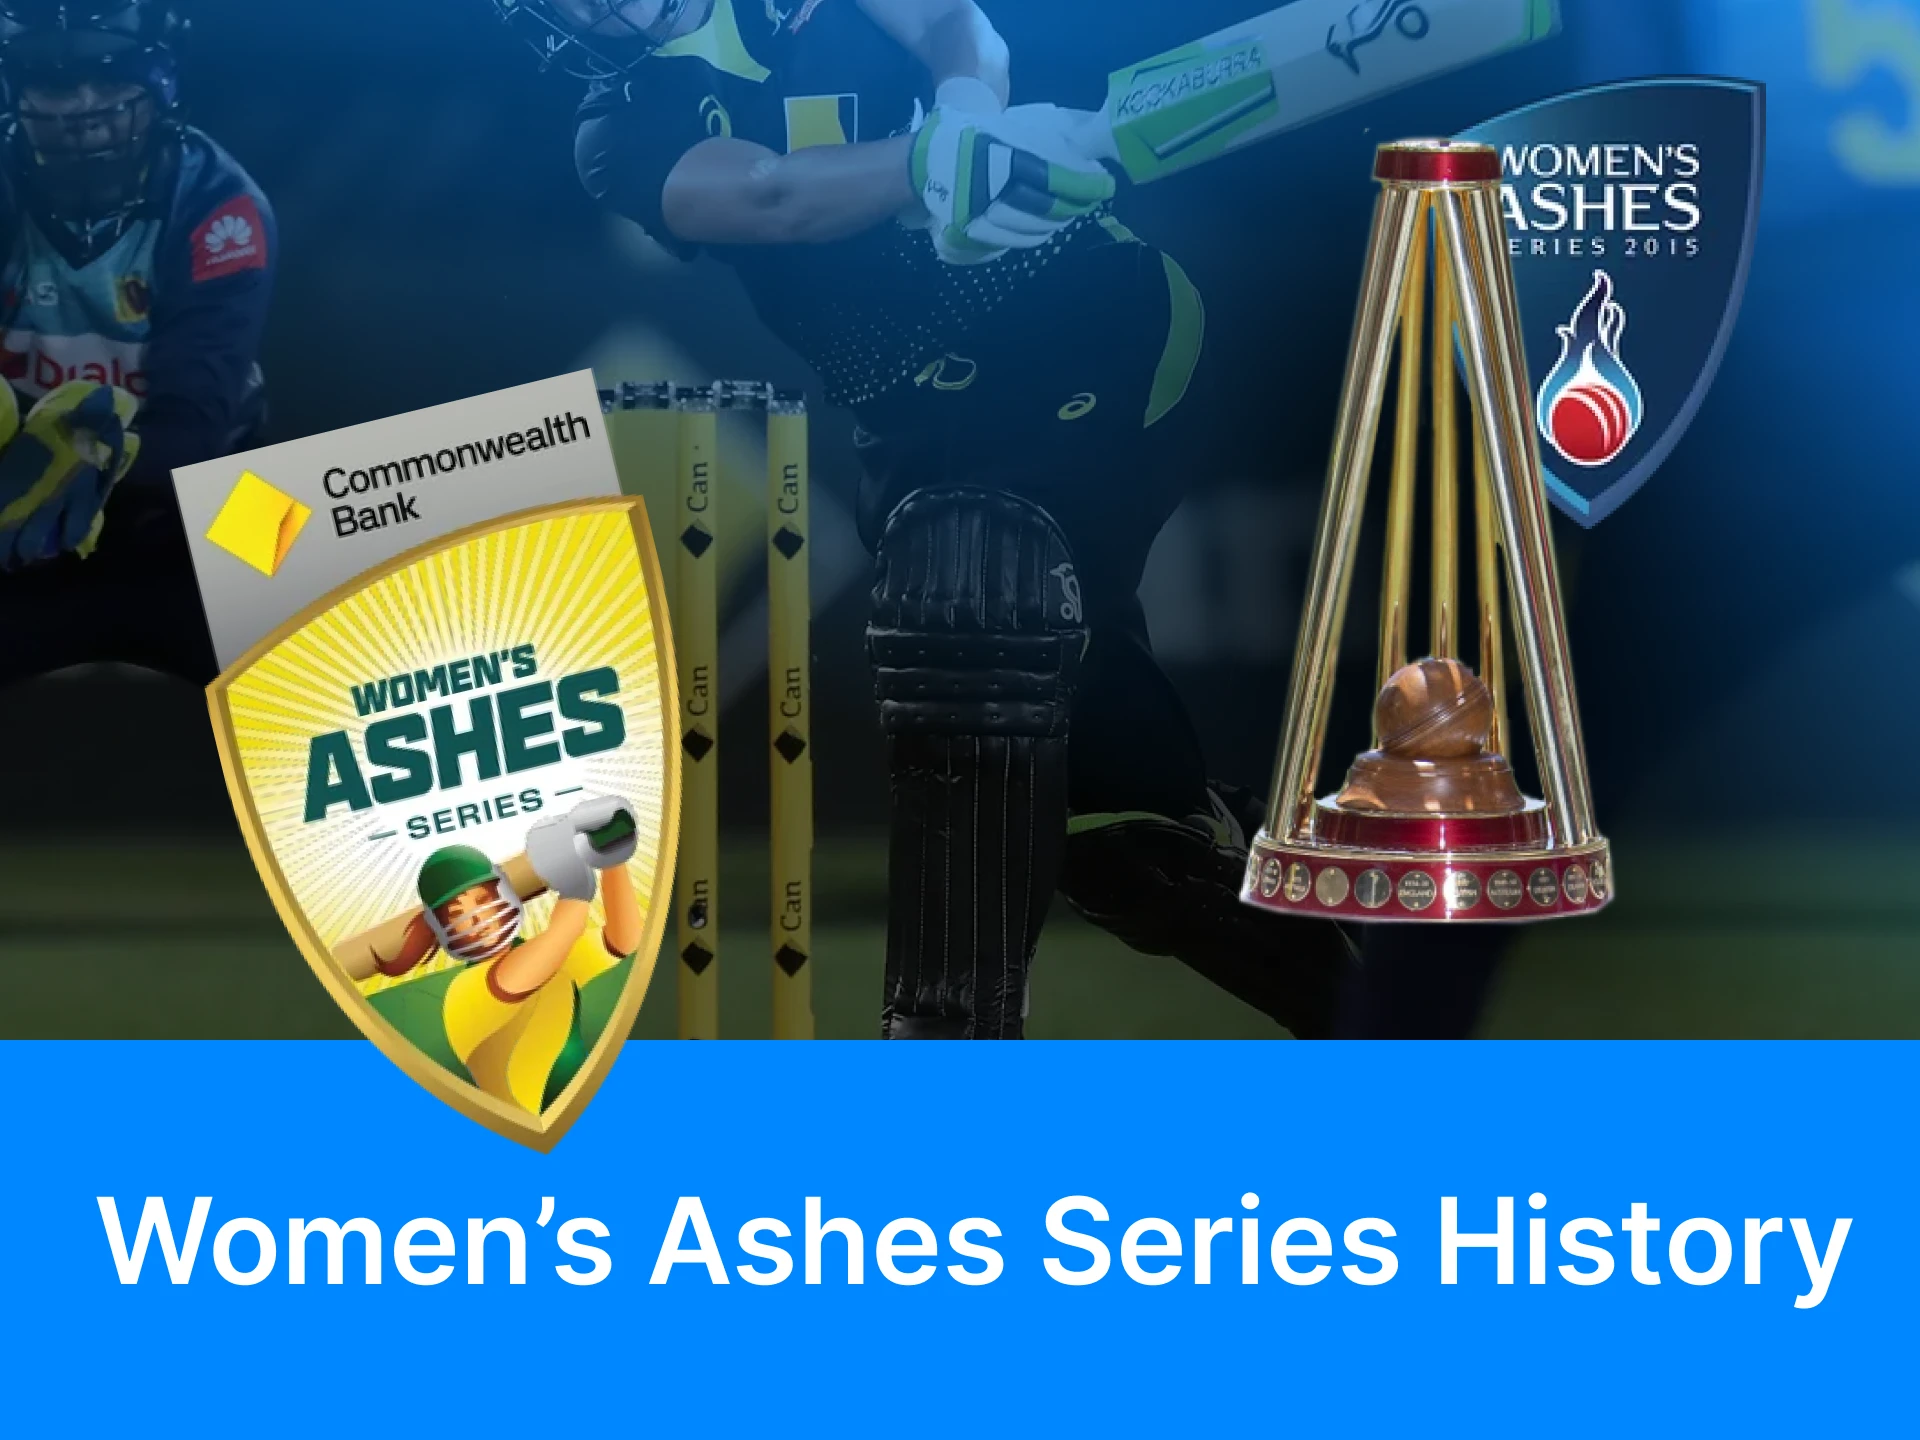 The Women's Ashes Series history started in 1934.